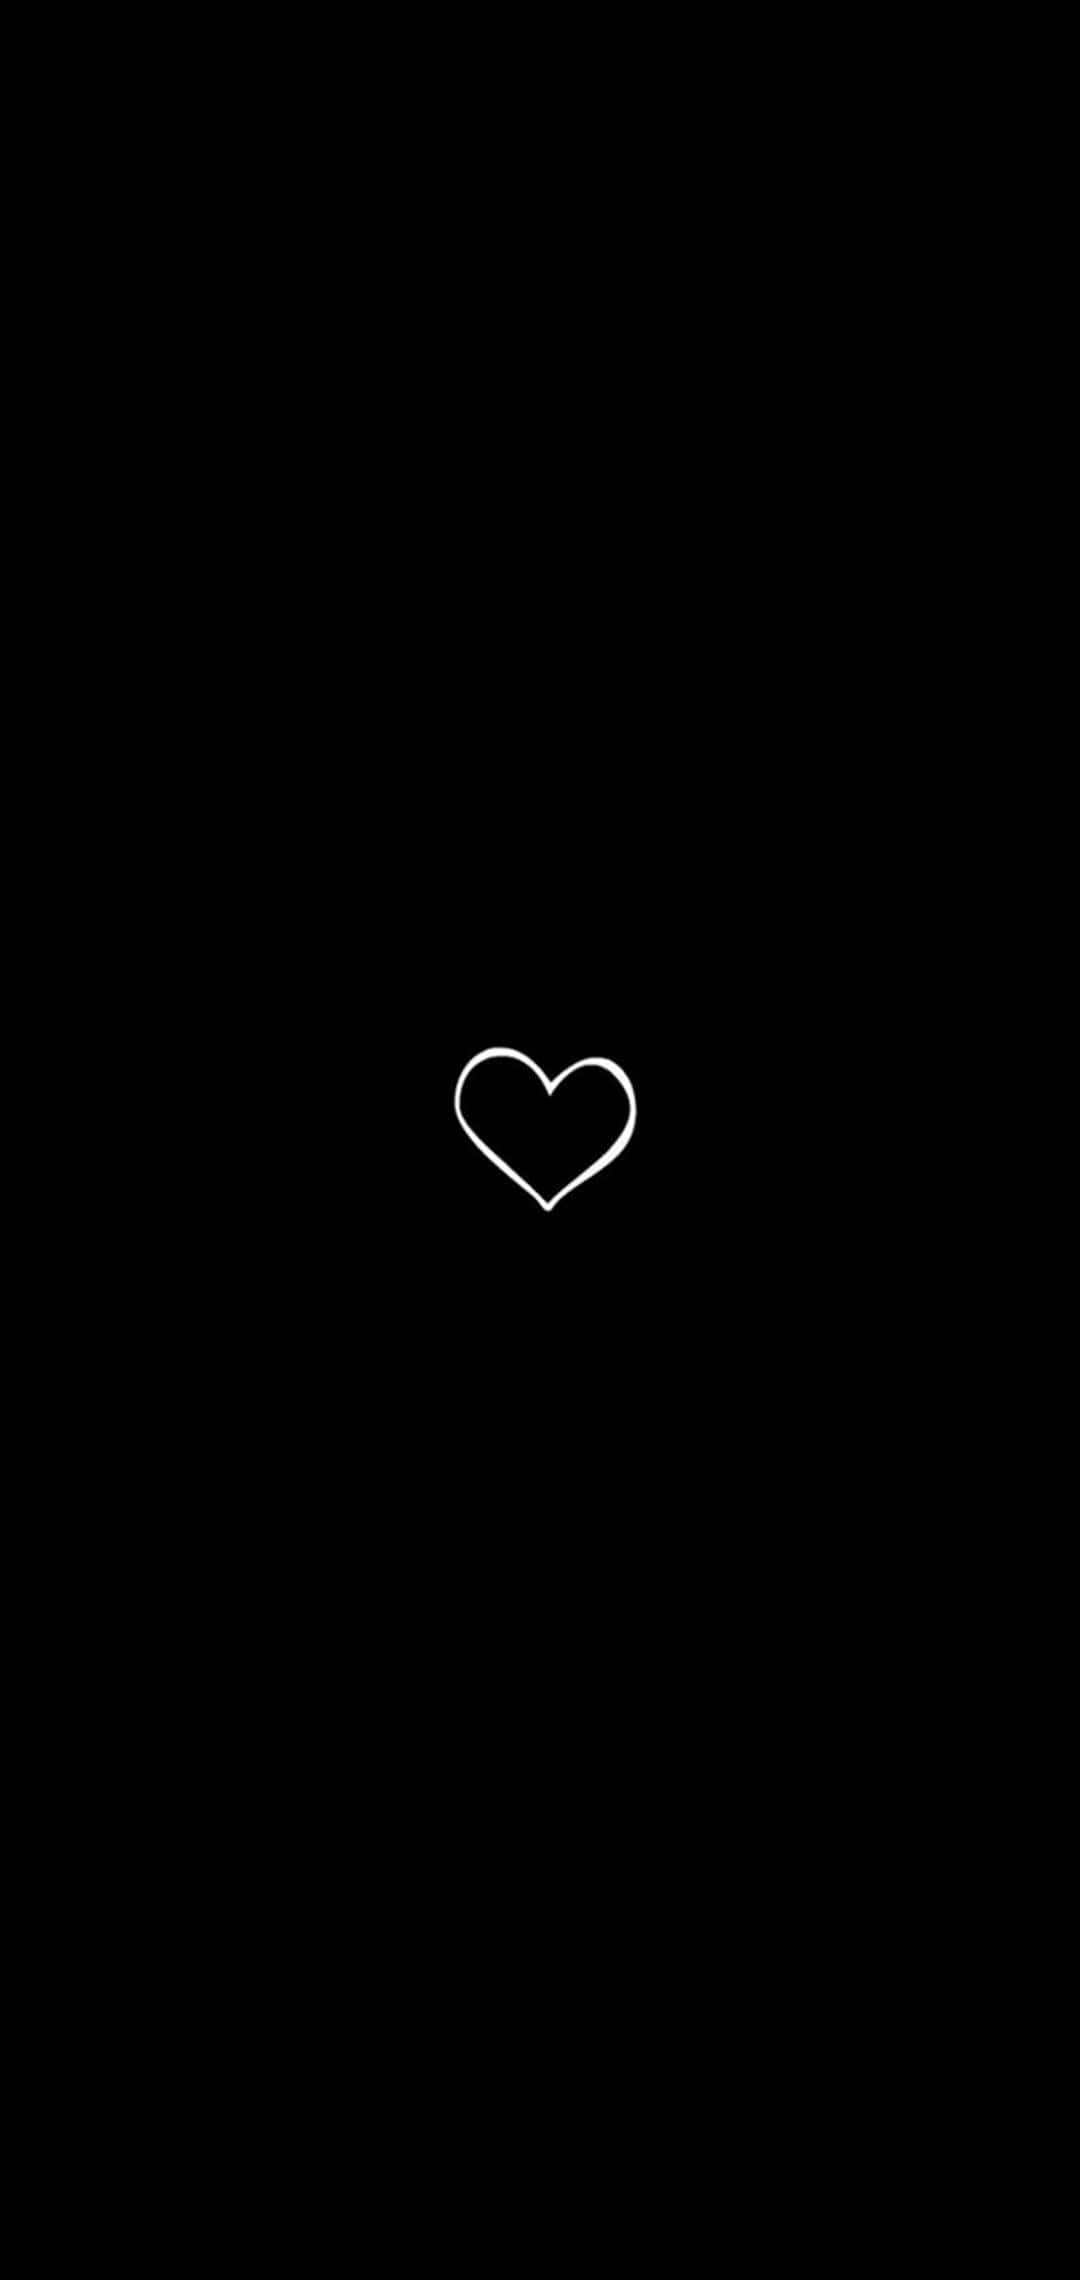 A Black Background With A White Heart On It